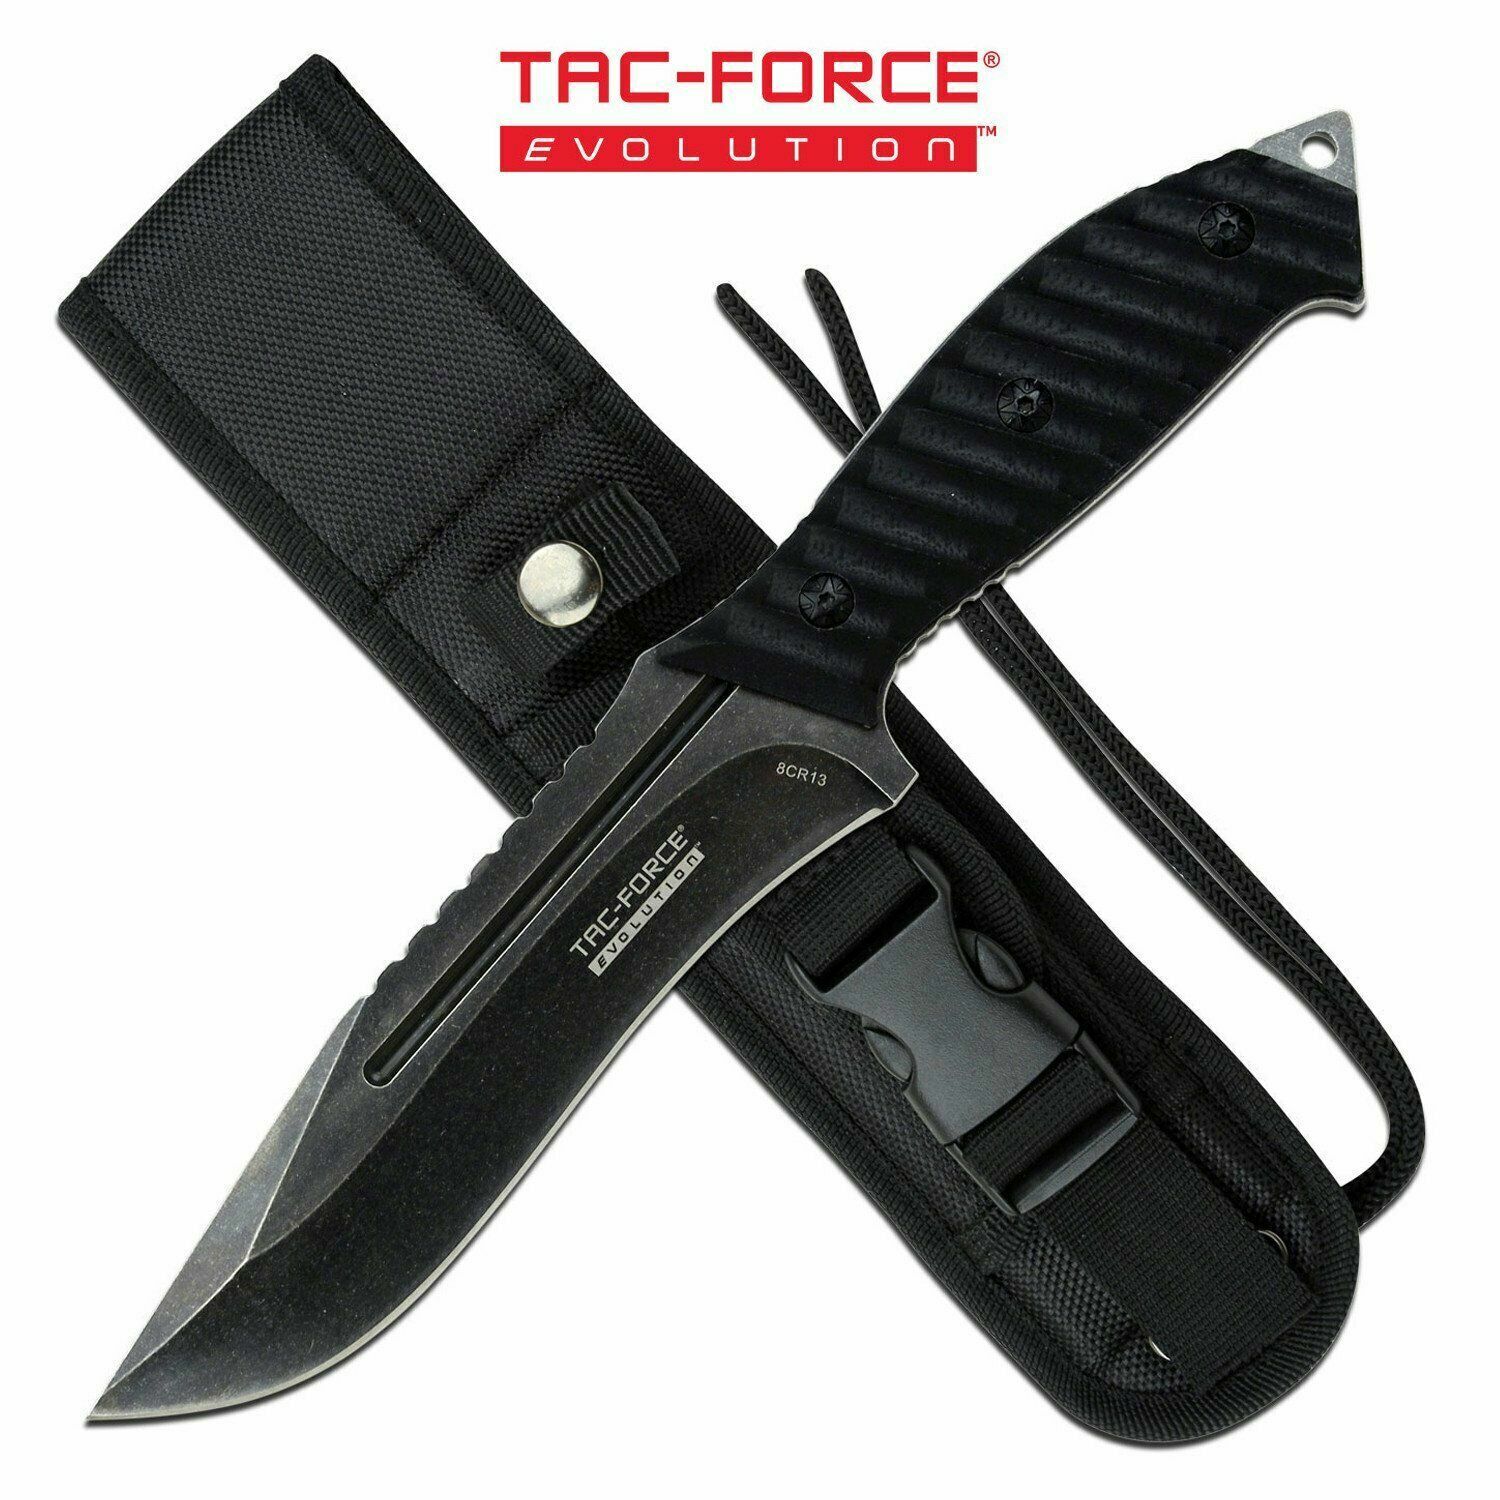 Tac-Force Evolution Fighter Bowie Knife 5mm Full Tang 8Cr13 2 Way Sheath 10.50